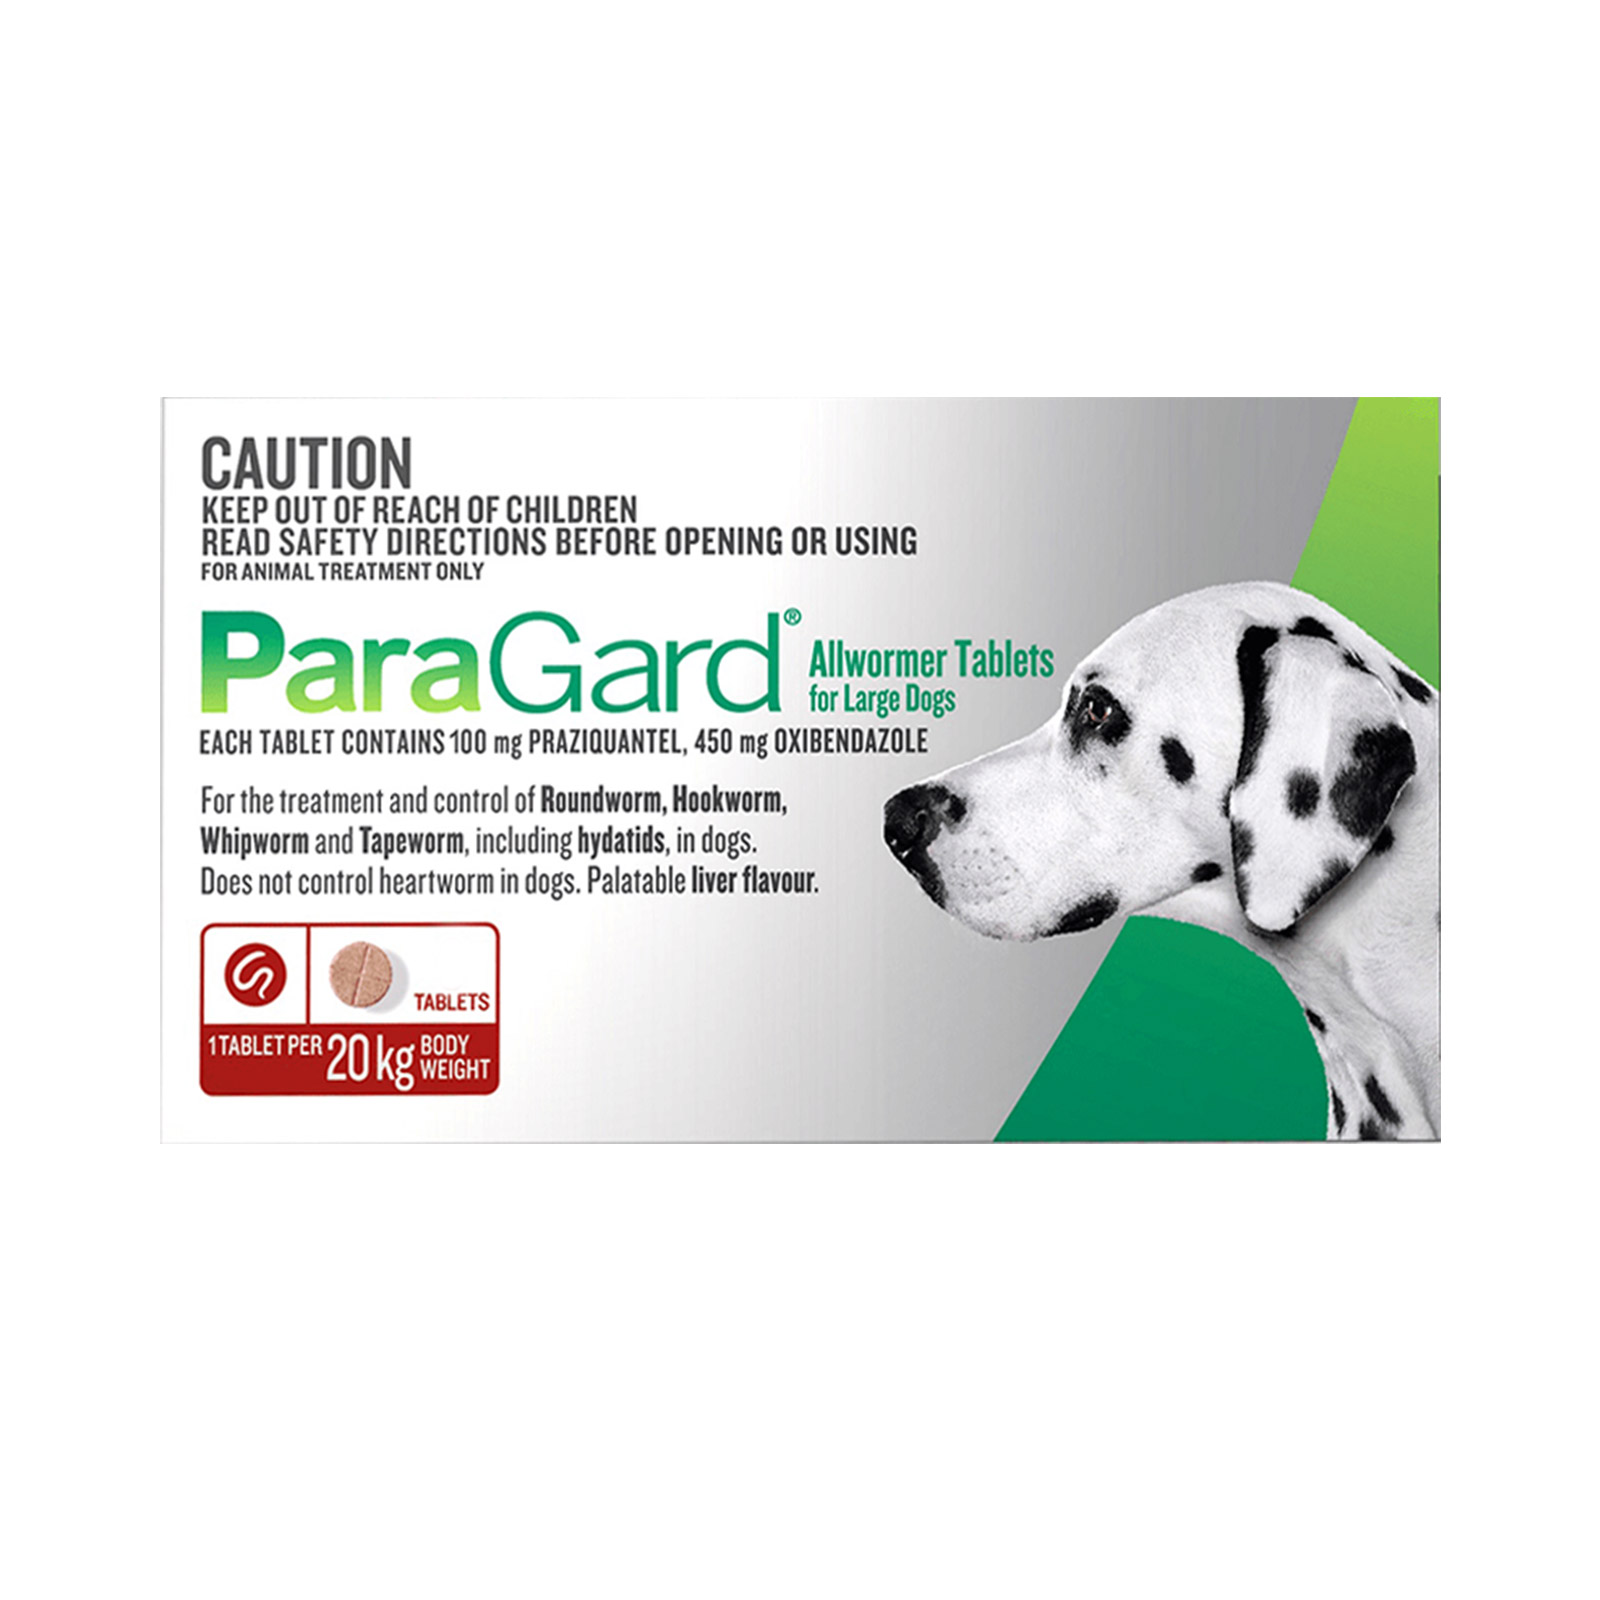 Paragard Allwormer For Large Dogs 44 Lbs 20 Kg red 3 Tablets